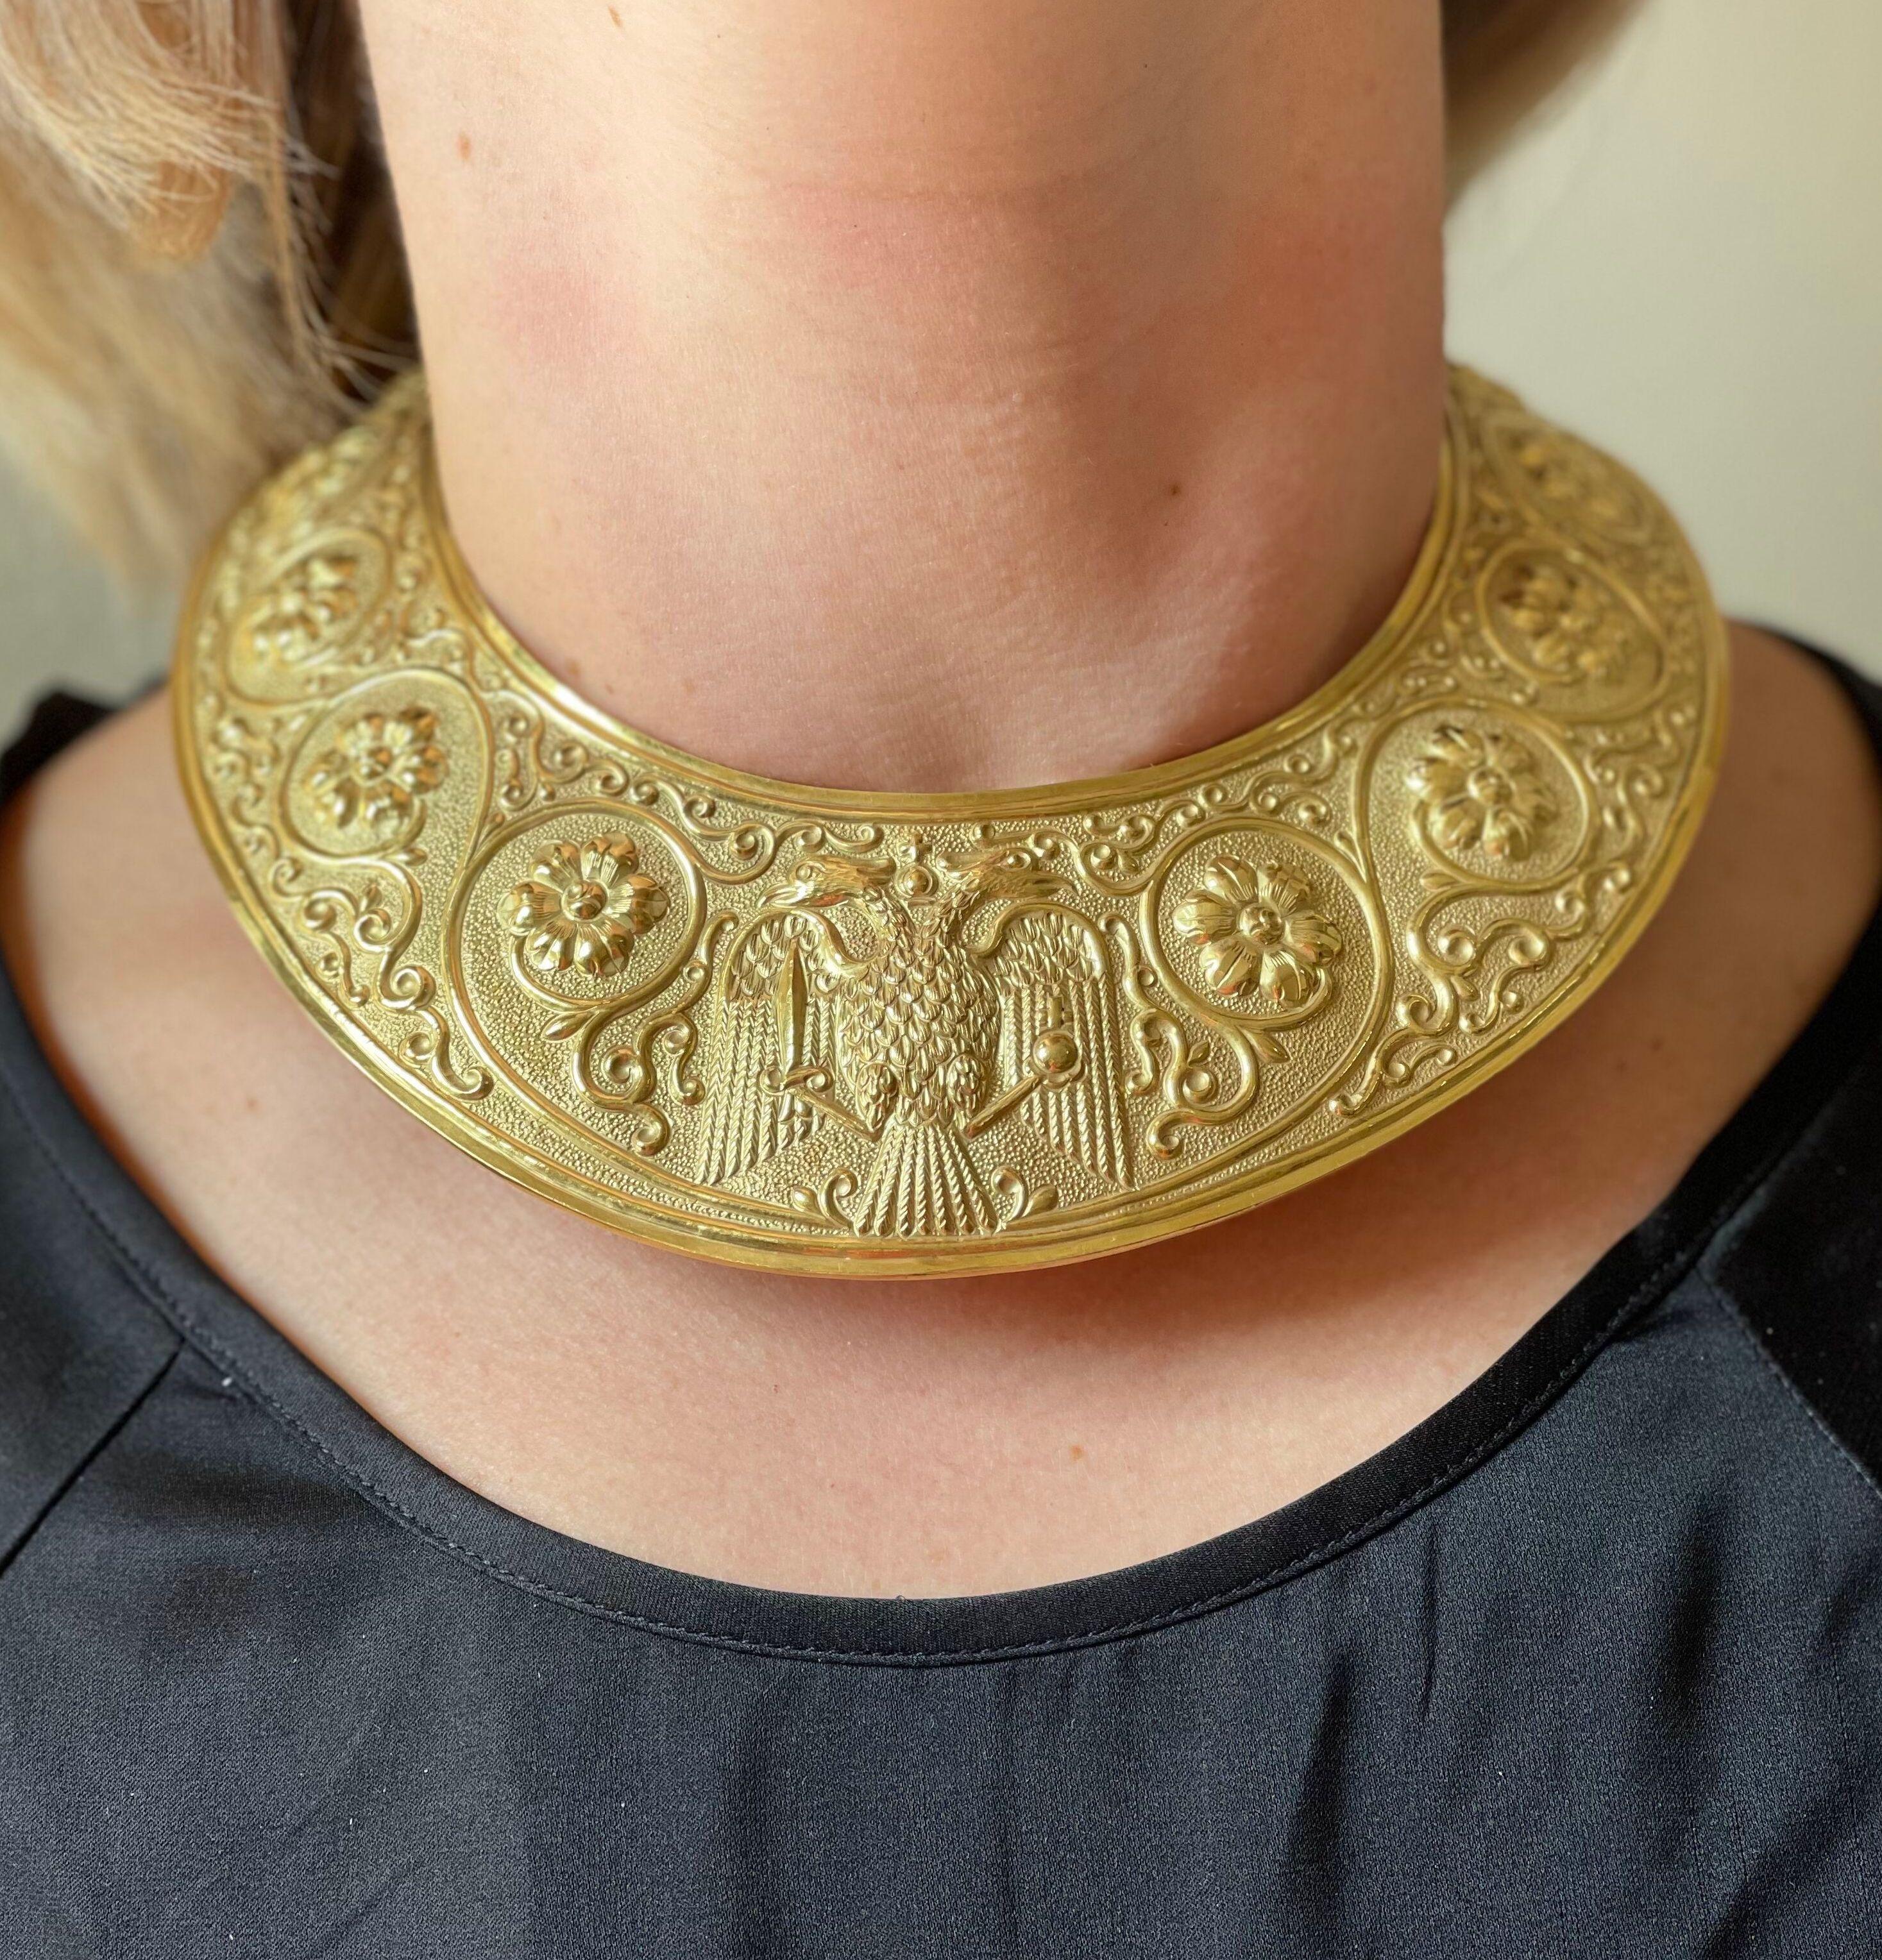 Impressive 18k gold Egyptian revival collar necklace, crafted in traditional manner for the Pharaoh era, a beautiful and unique piece.  The necklace will fit an average size neck, approximately 13-14